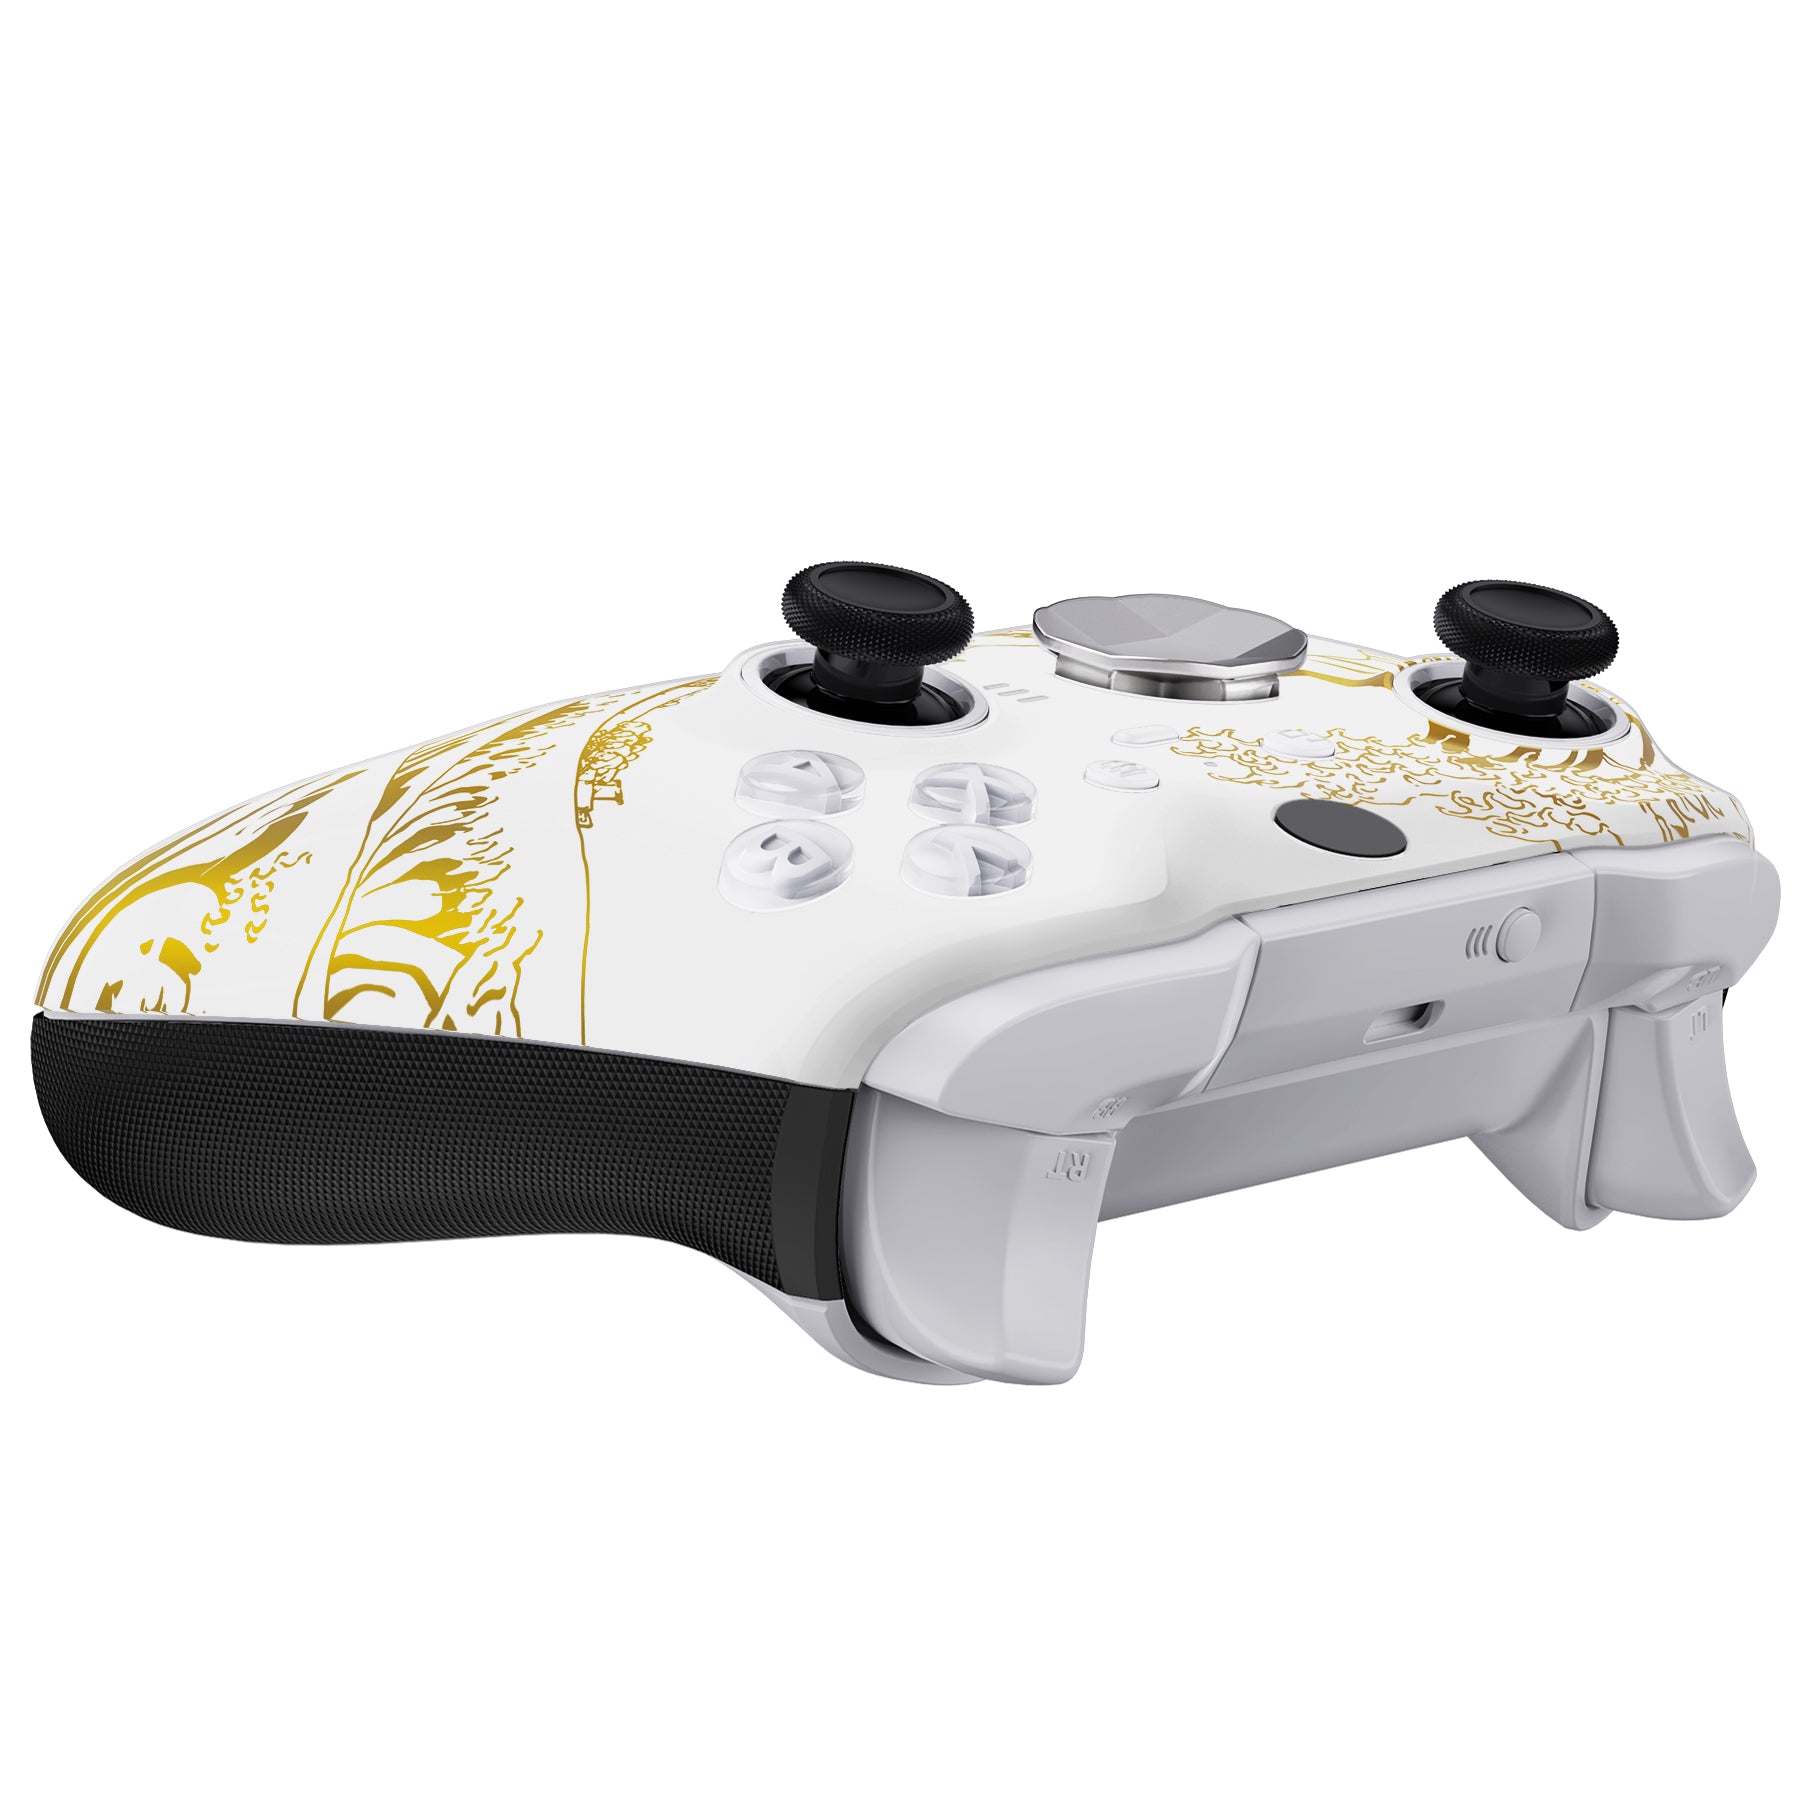 eXtremeRate Replacement Front Housing Shell Case with Accent Rings for Xbox One Elite Series 2 & Elite 2 Core Controller (Model 1797) - The Great GOLDEN Wave Off Kanagawa - White eXtremeRate